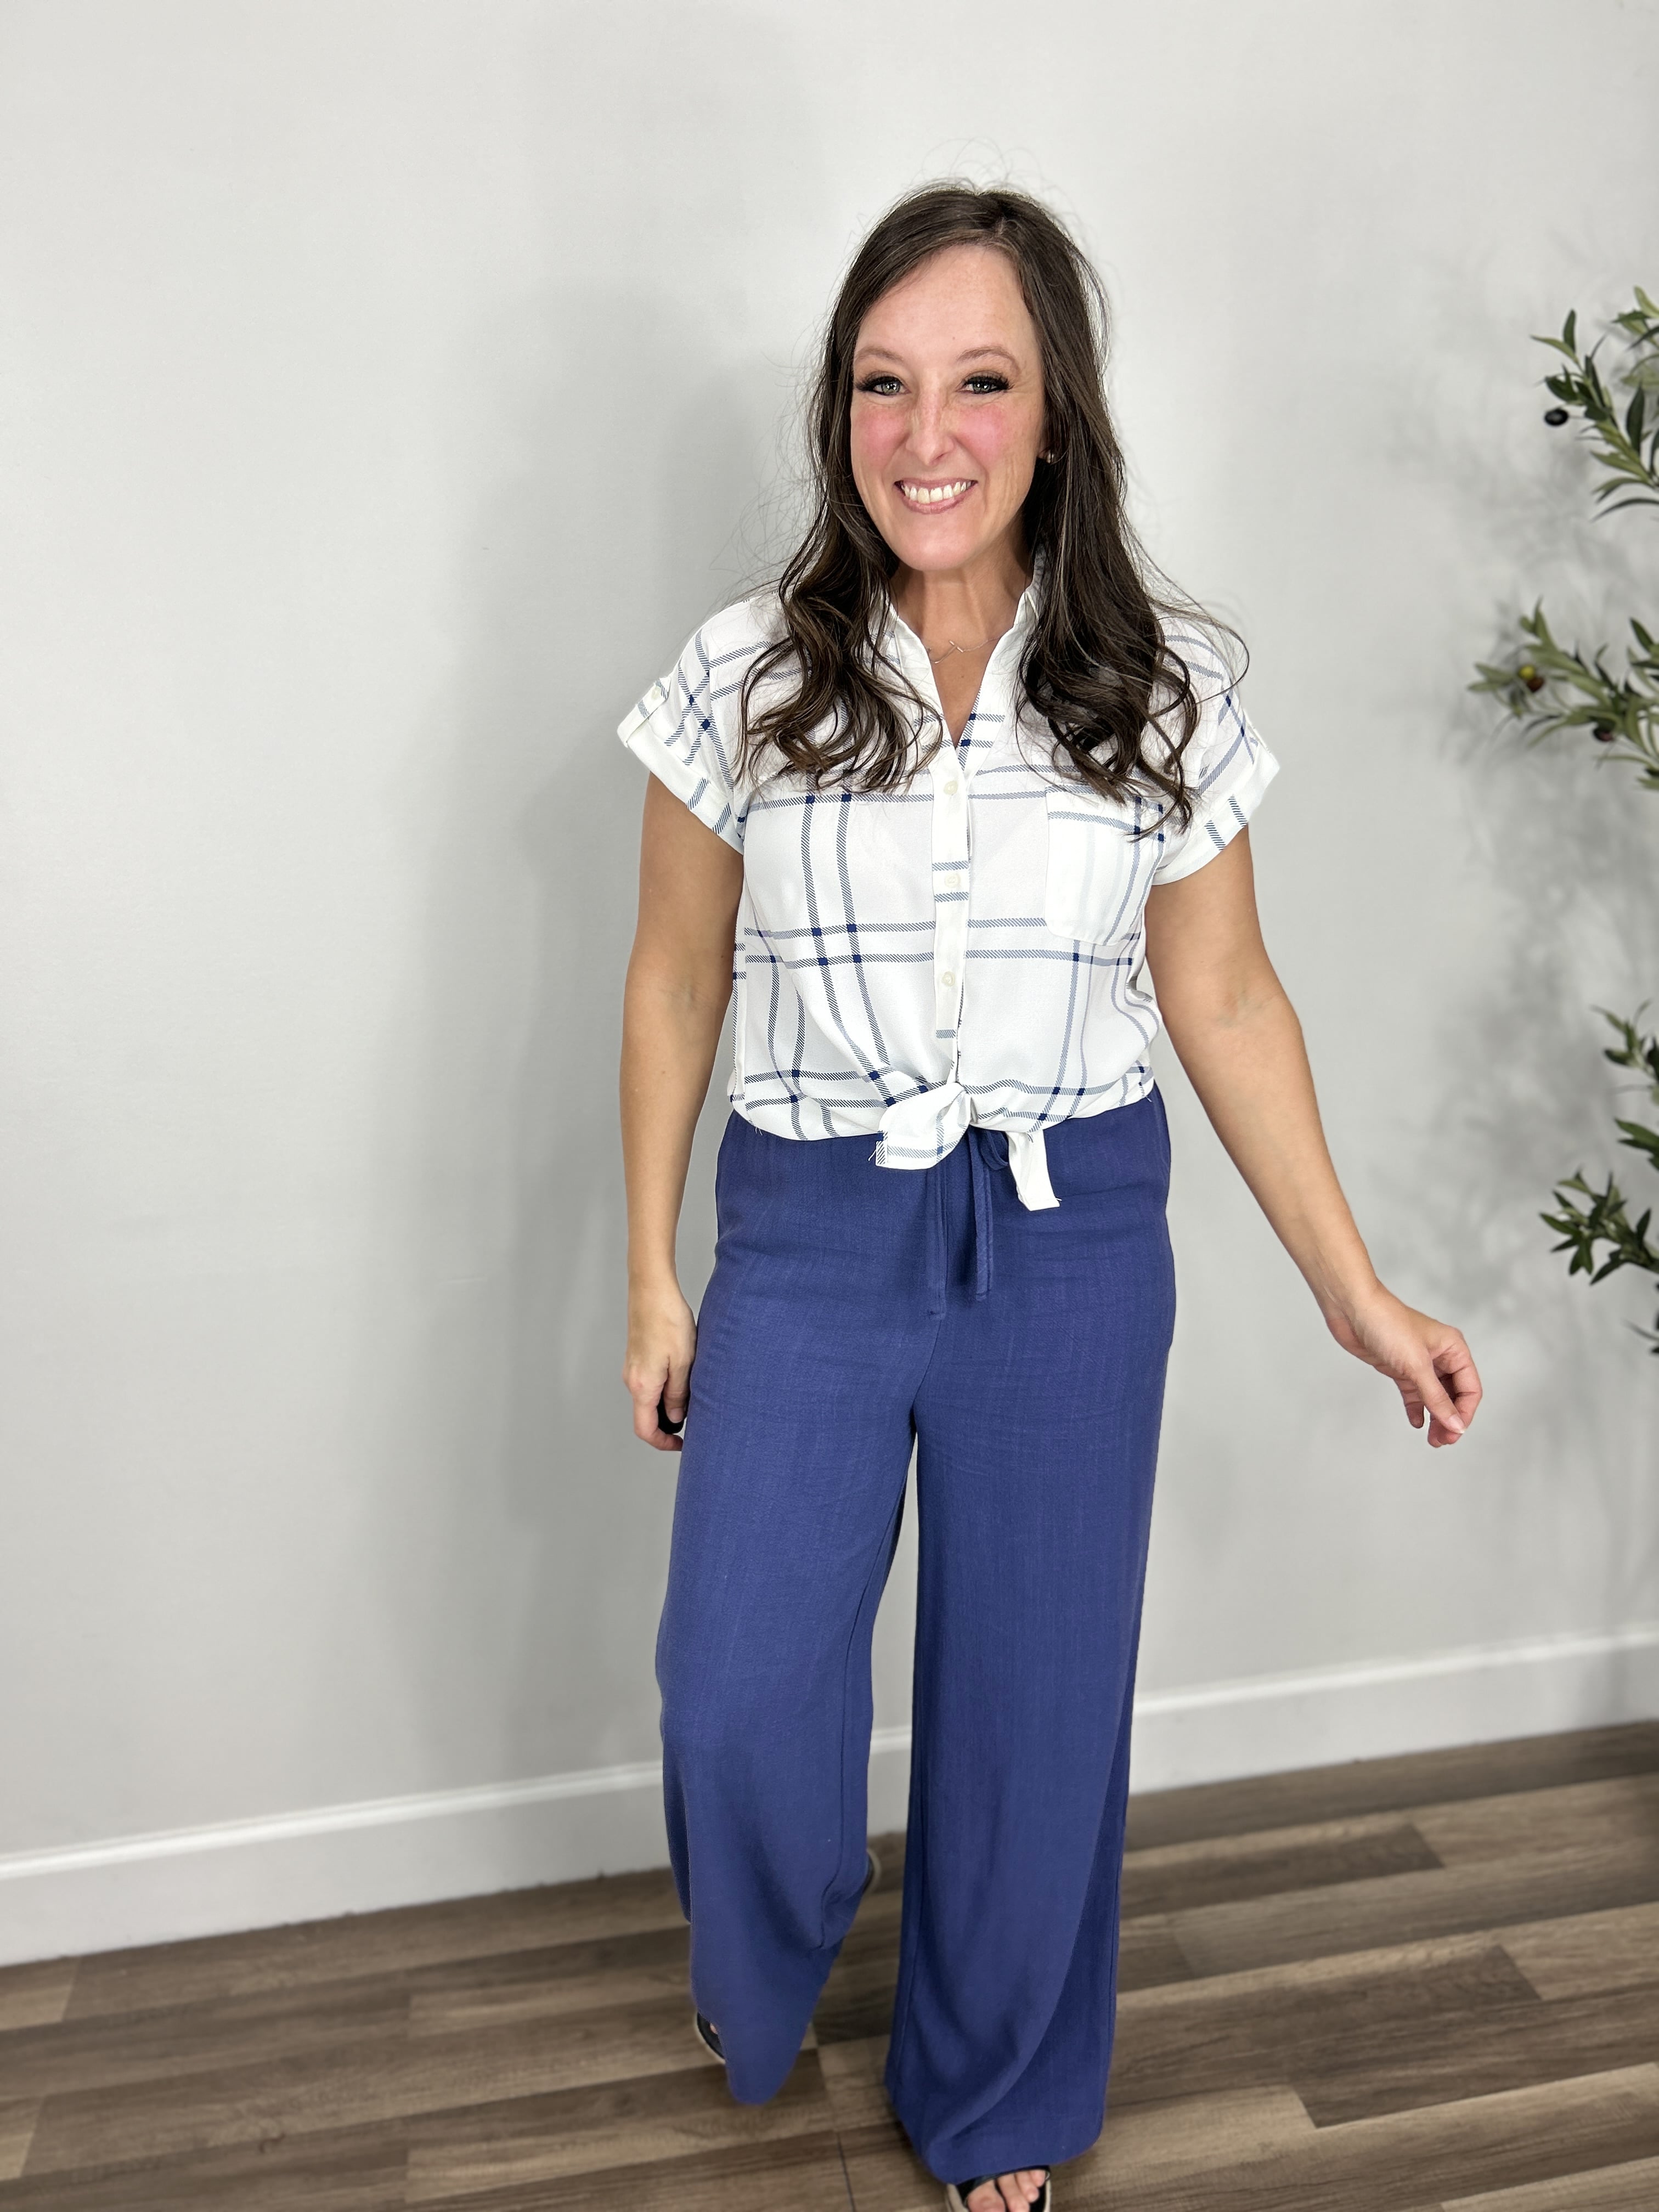 Women's Franklin Plaid Button Down Top with short sleeves and fold over collar tied in a front knot paired with blue wide leg pants.